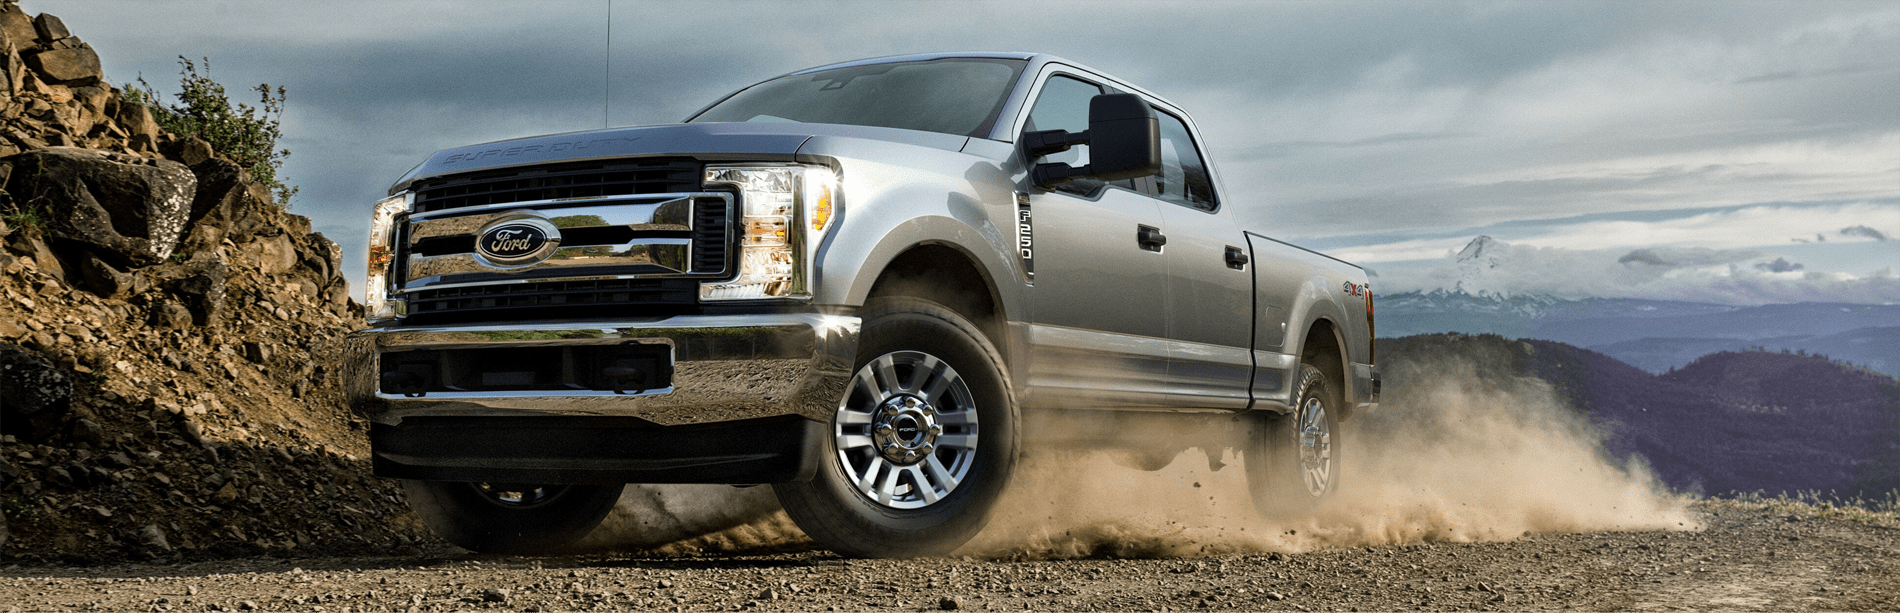 FordTruck Kicking up Dust